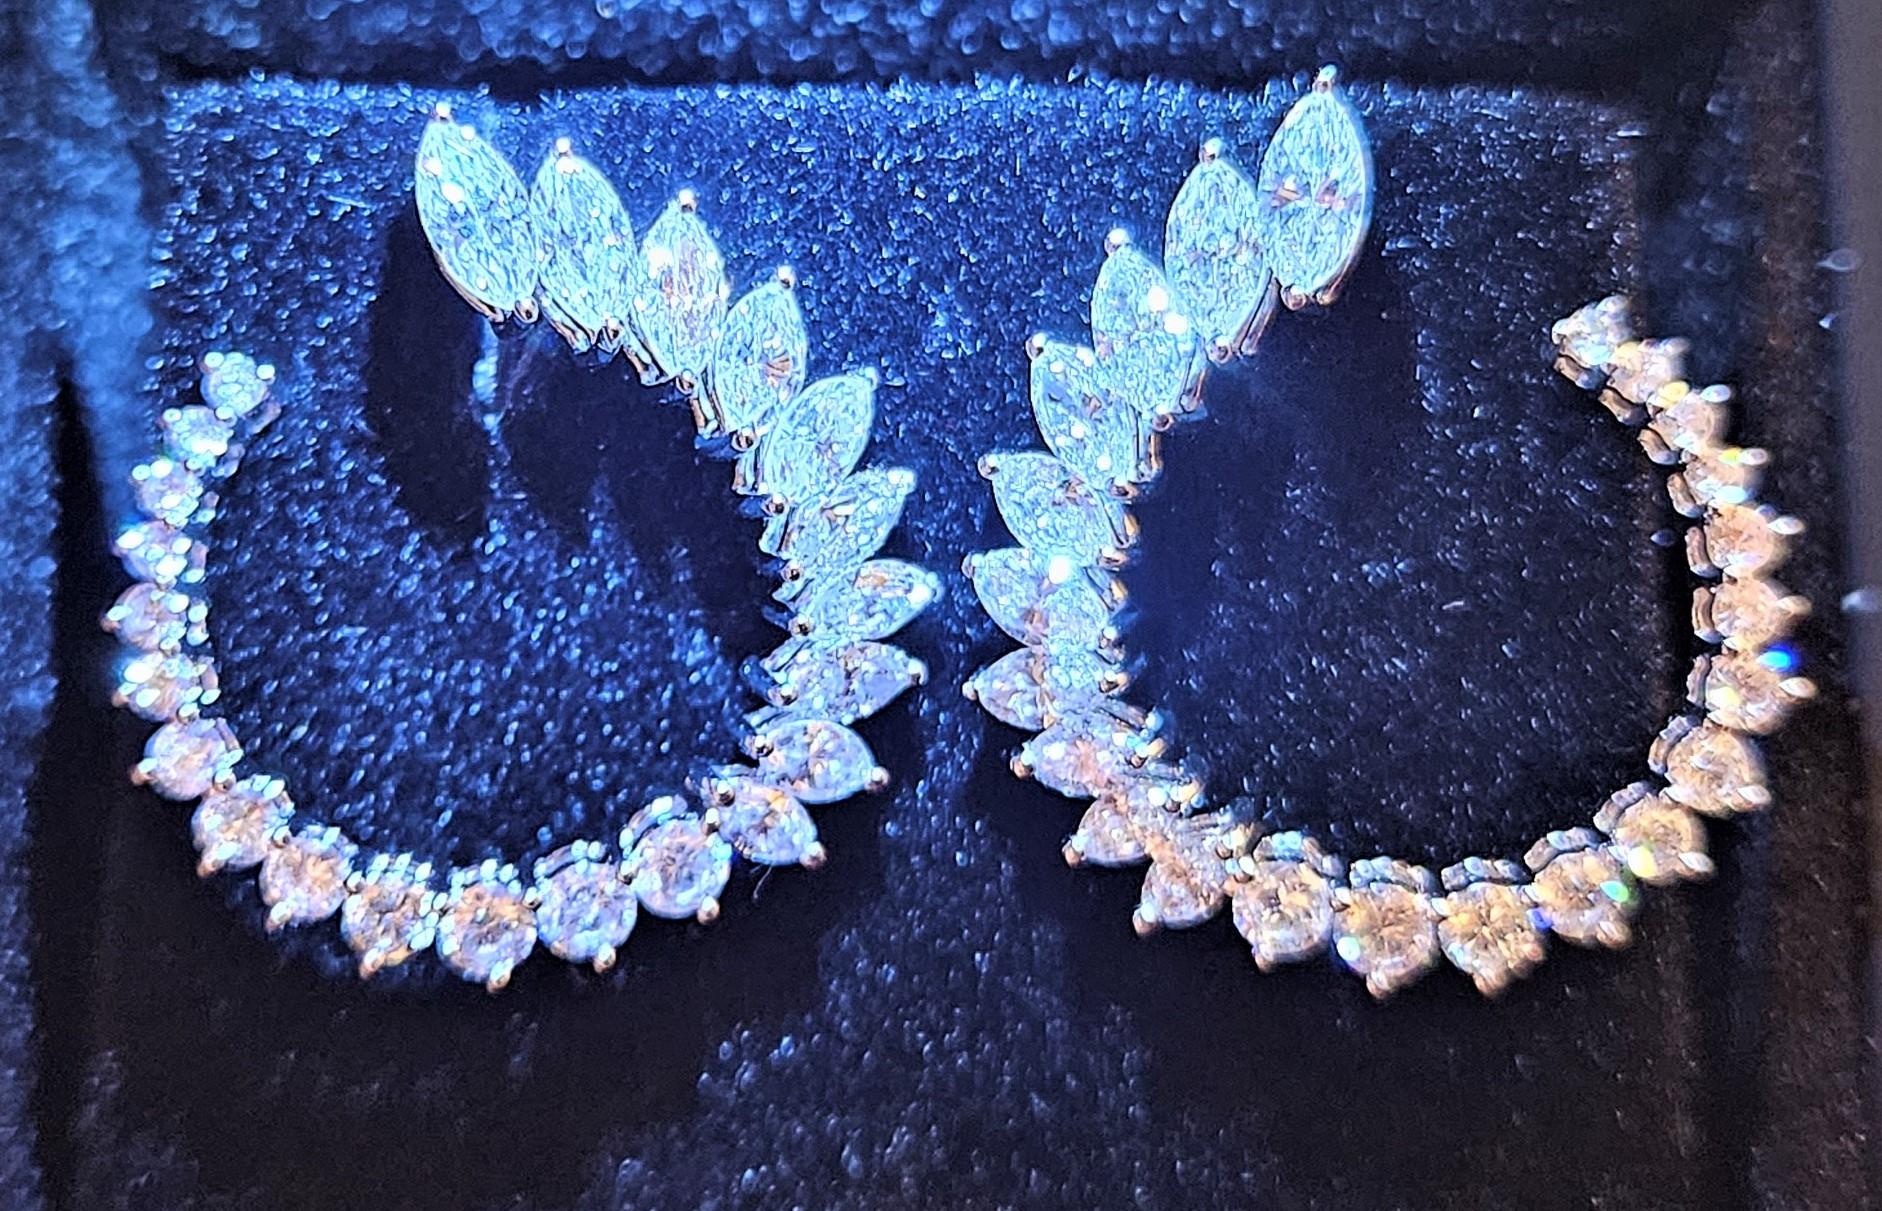 The Following Item we are offering are these Extremely Rare Beautiful 18KT Gold Fine Large Fancy Diamond Dangle Earrings comprised of approx 2.50CTS Carats of Fine Fancy Shaped Gorgeous Glittering Diamonds!! These Extremely Rare Magnificent Earrings